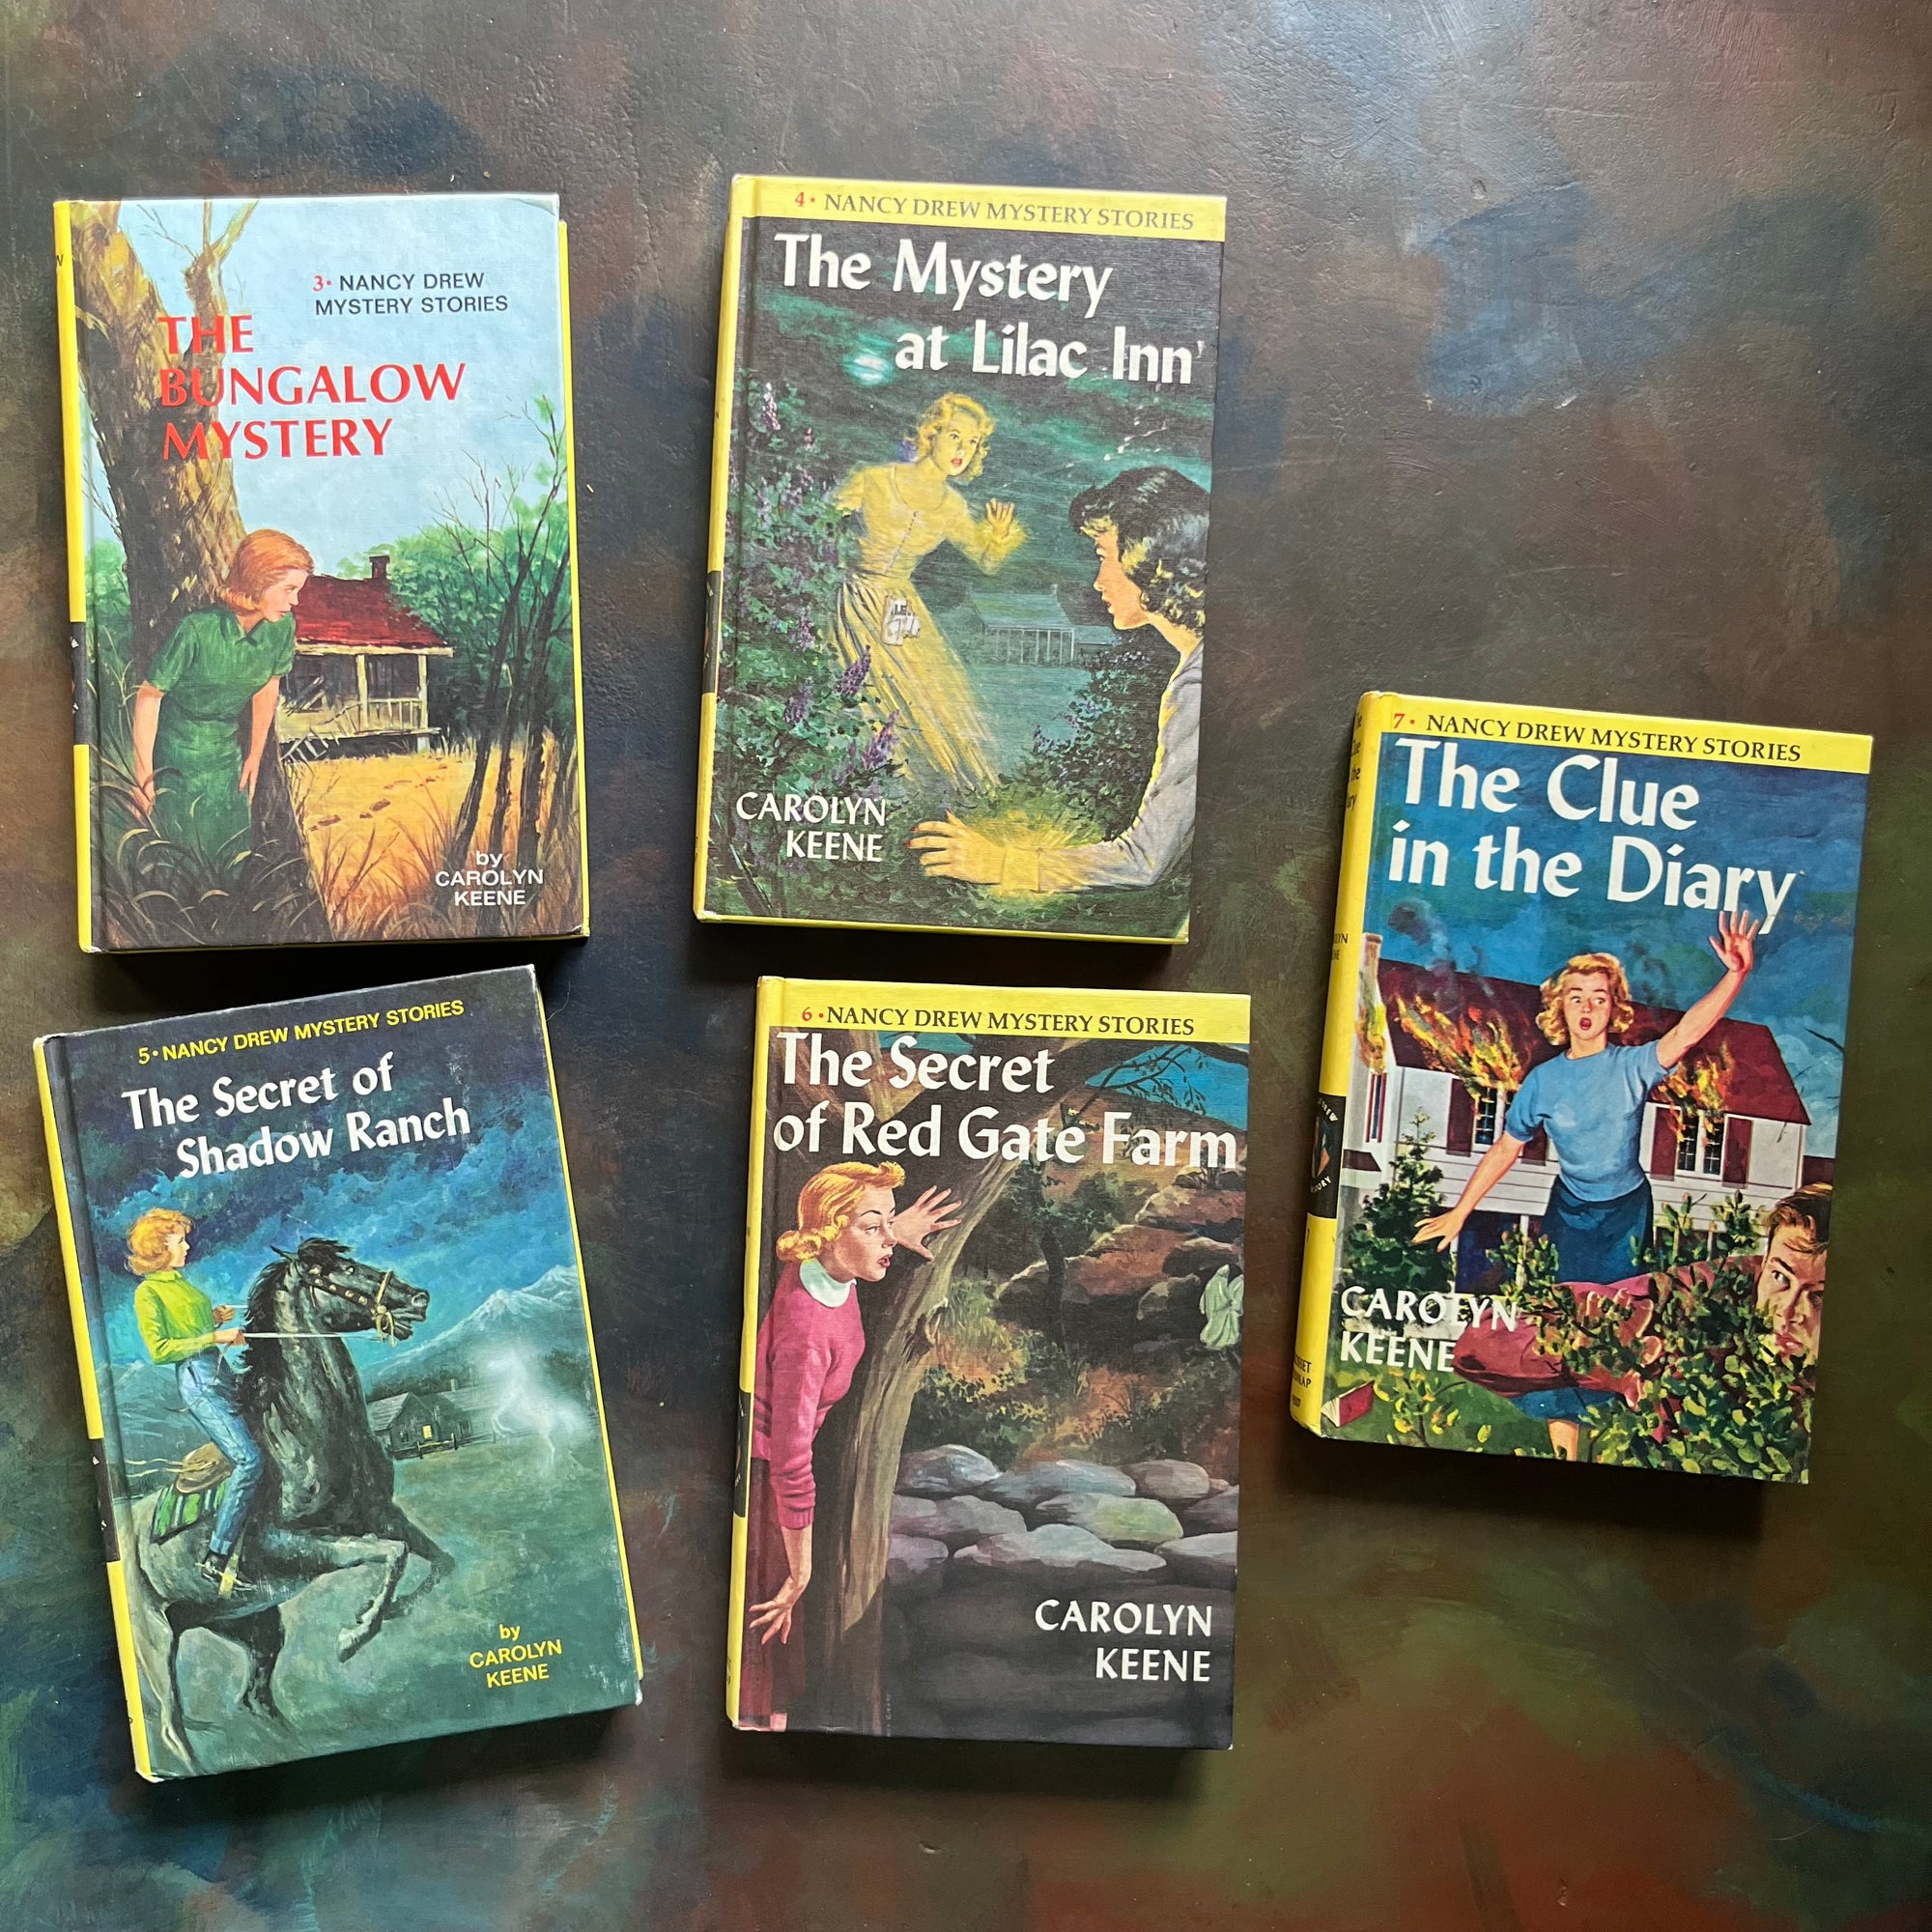 Nancy Drew Mystery Stories Starter Set-Books Three through Seven-vintage children's chapter books-Carolyn Keene-view of the front covers